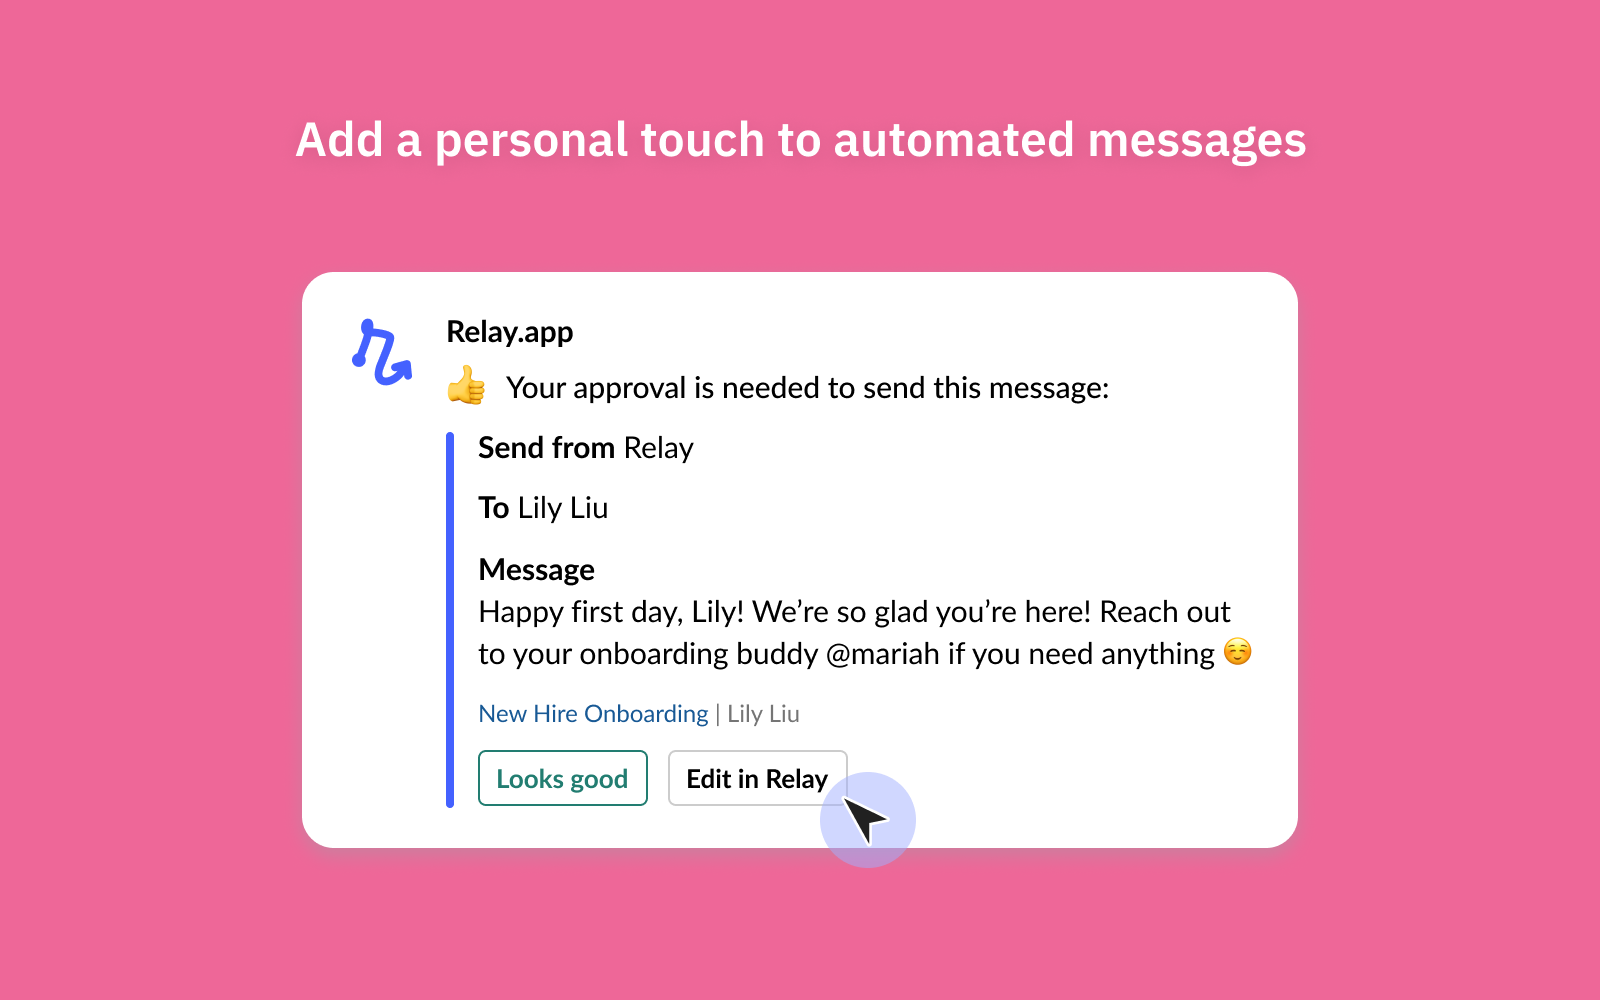 Human-in-the-Loop approvals in Relay.app